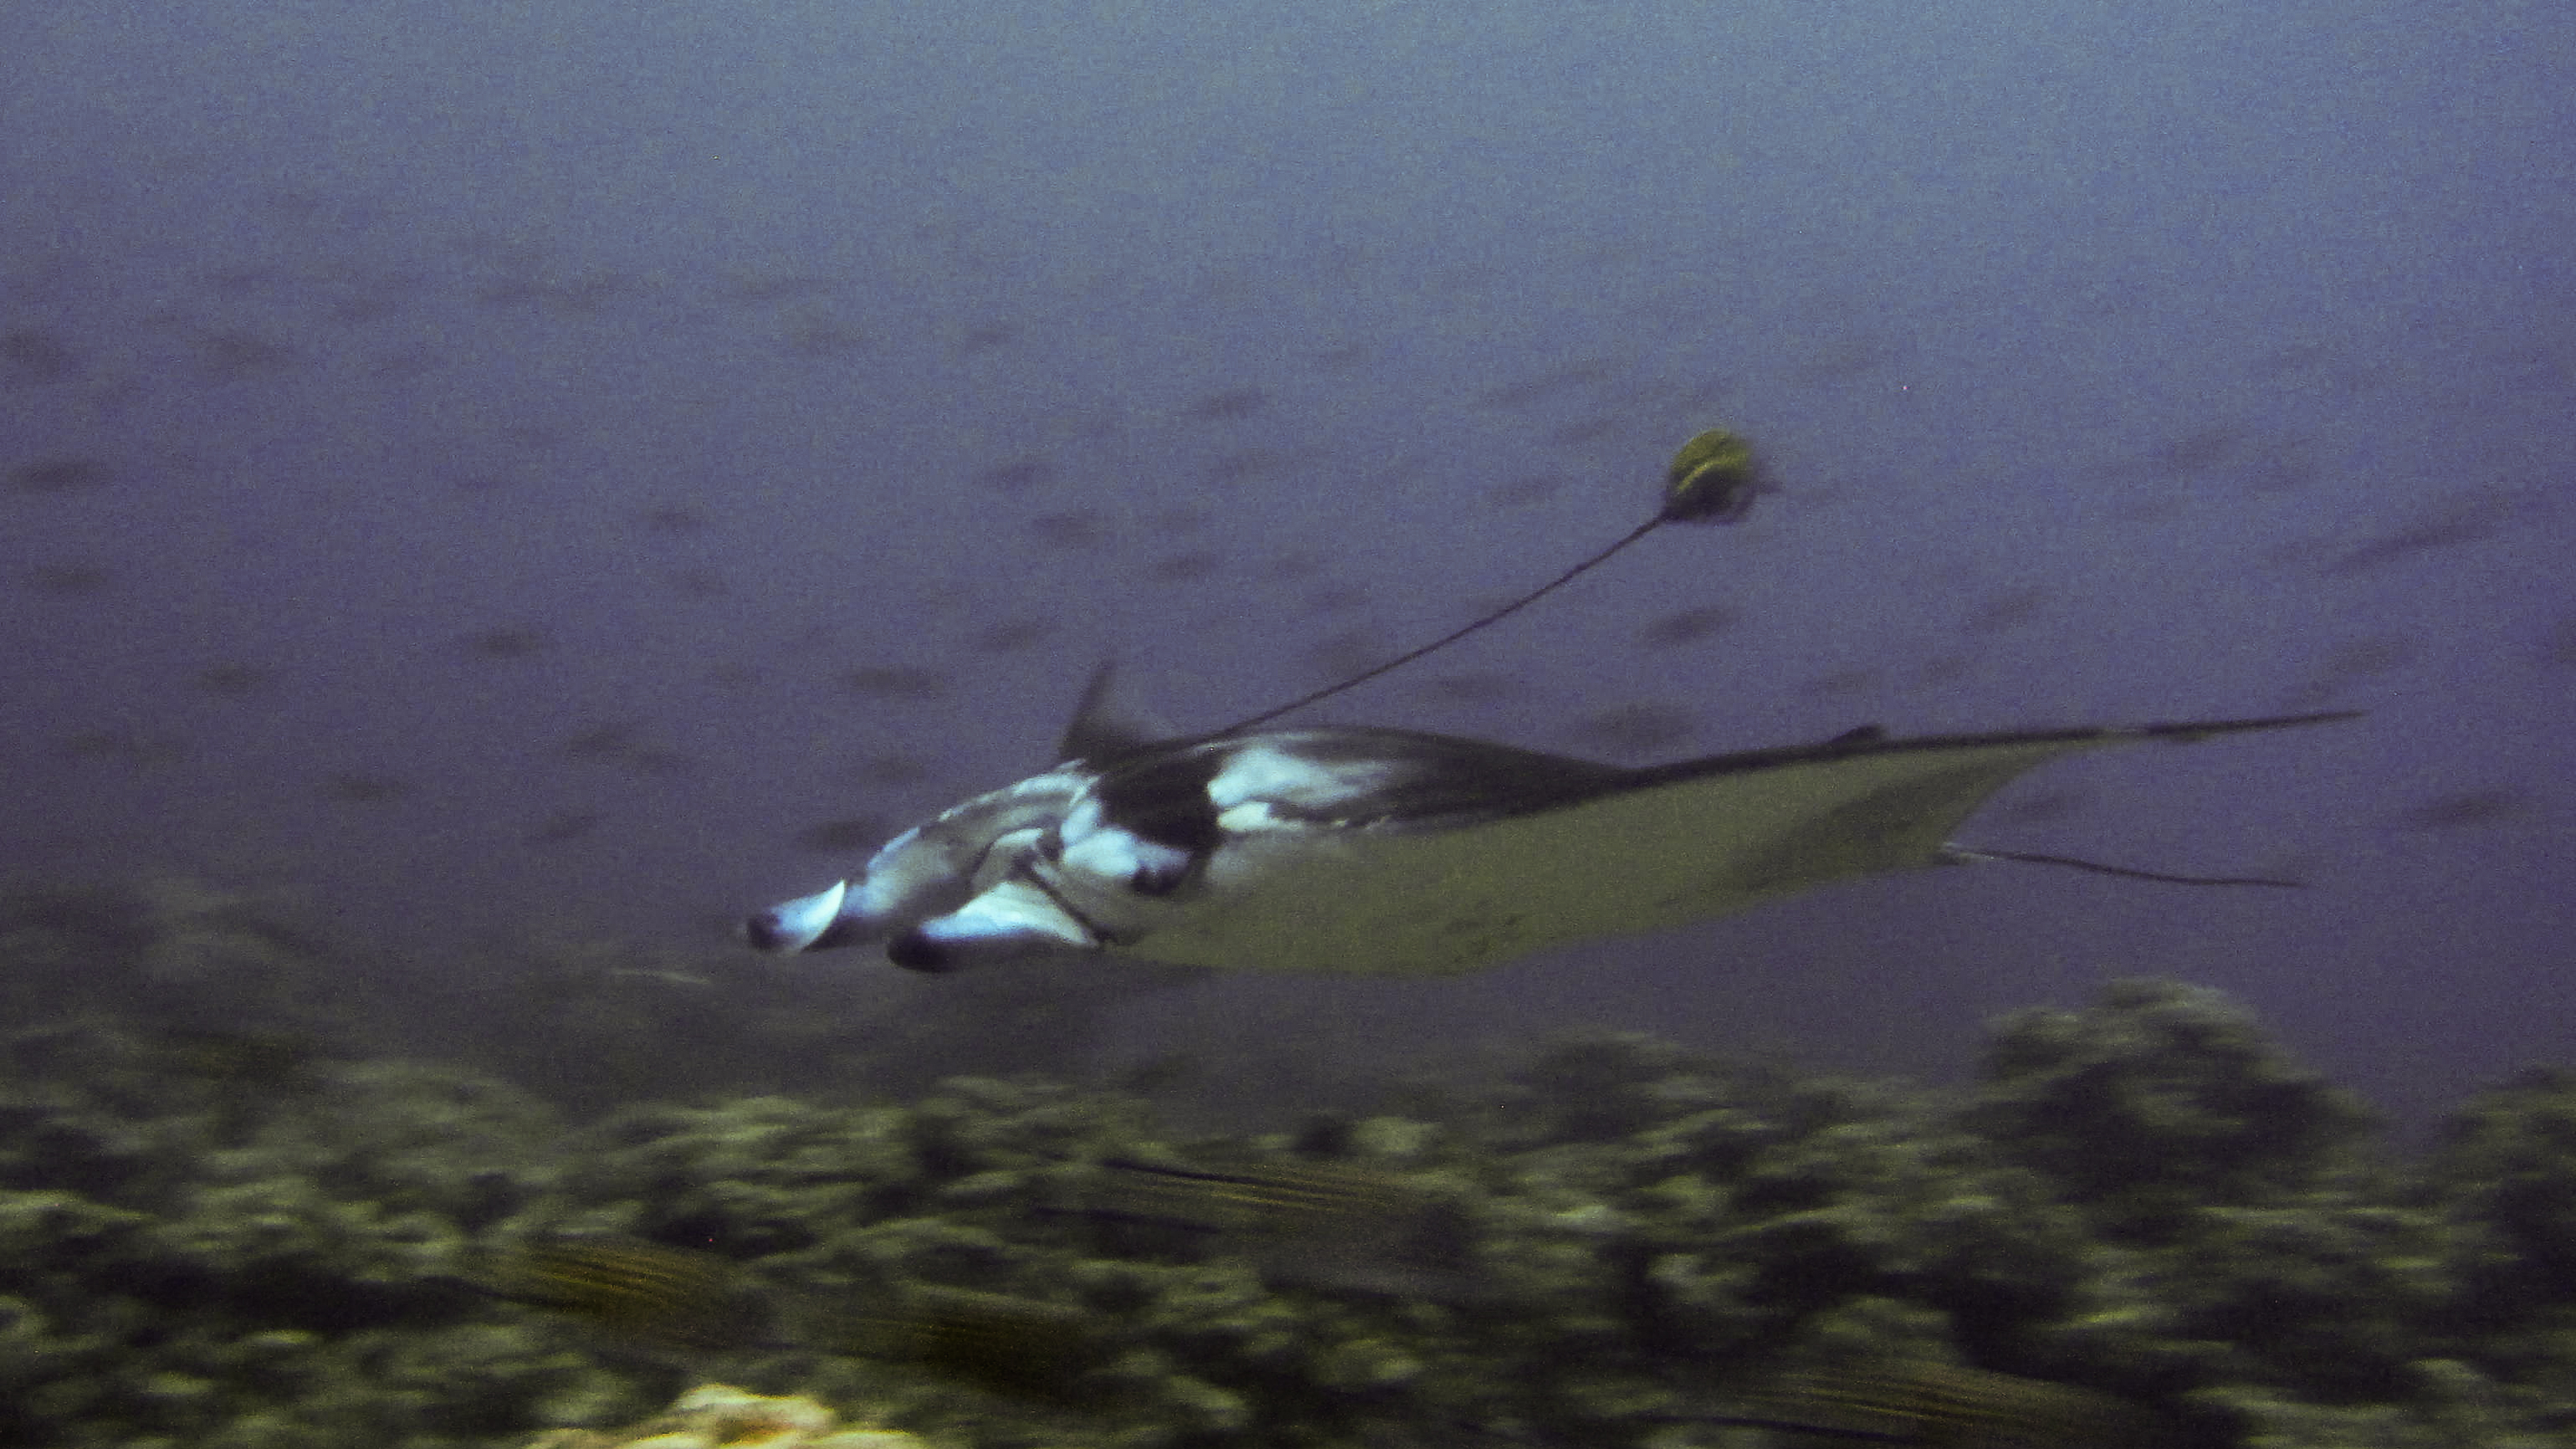 Manta with Bouy and rope around it